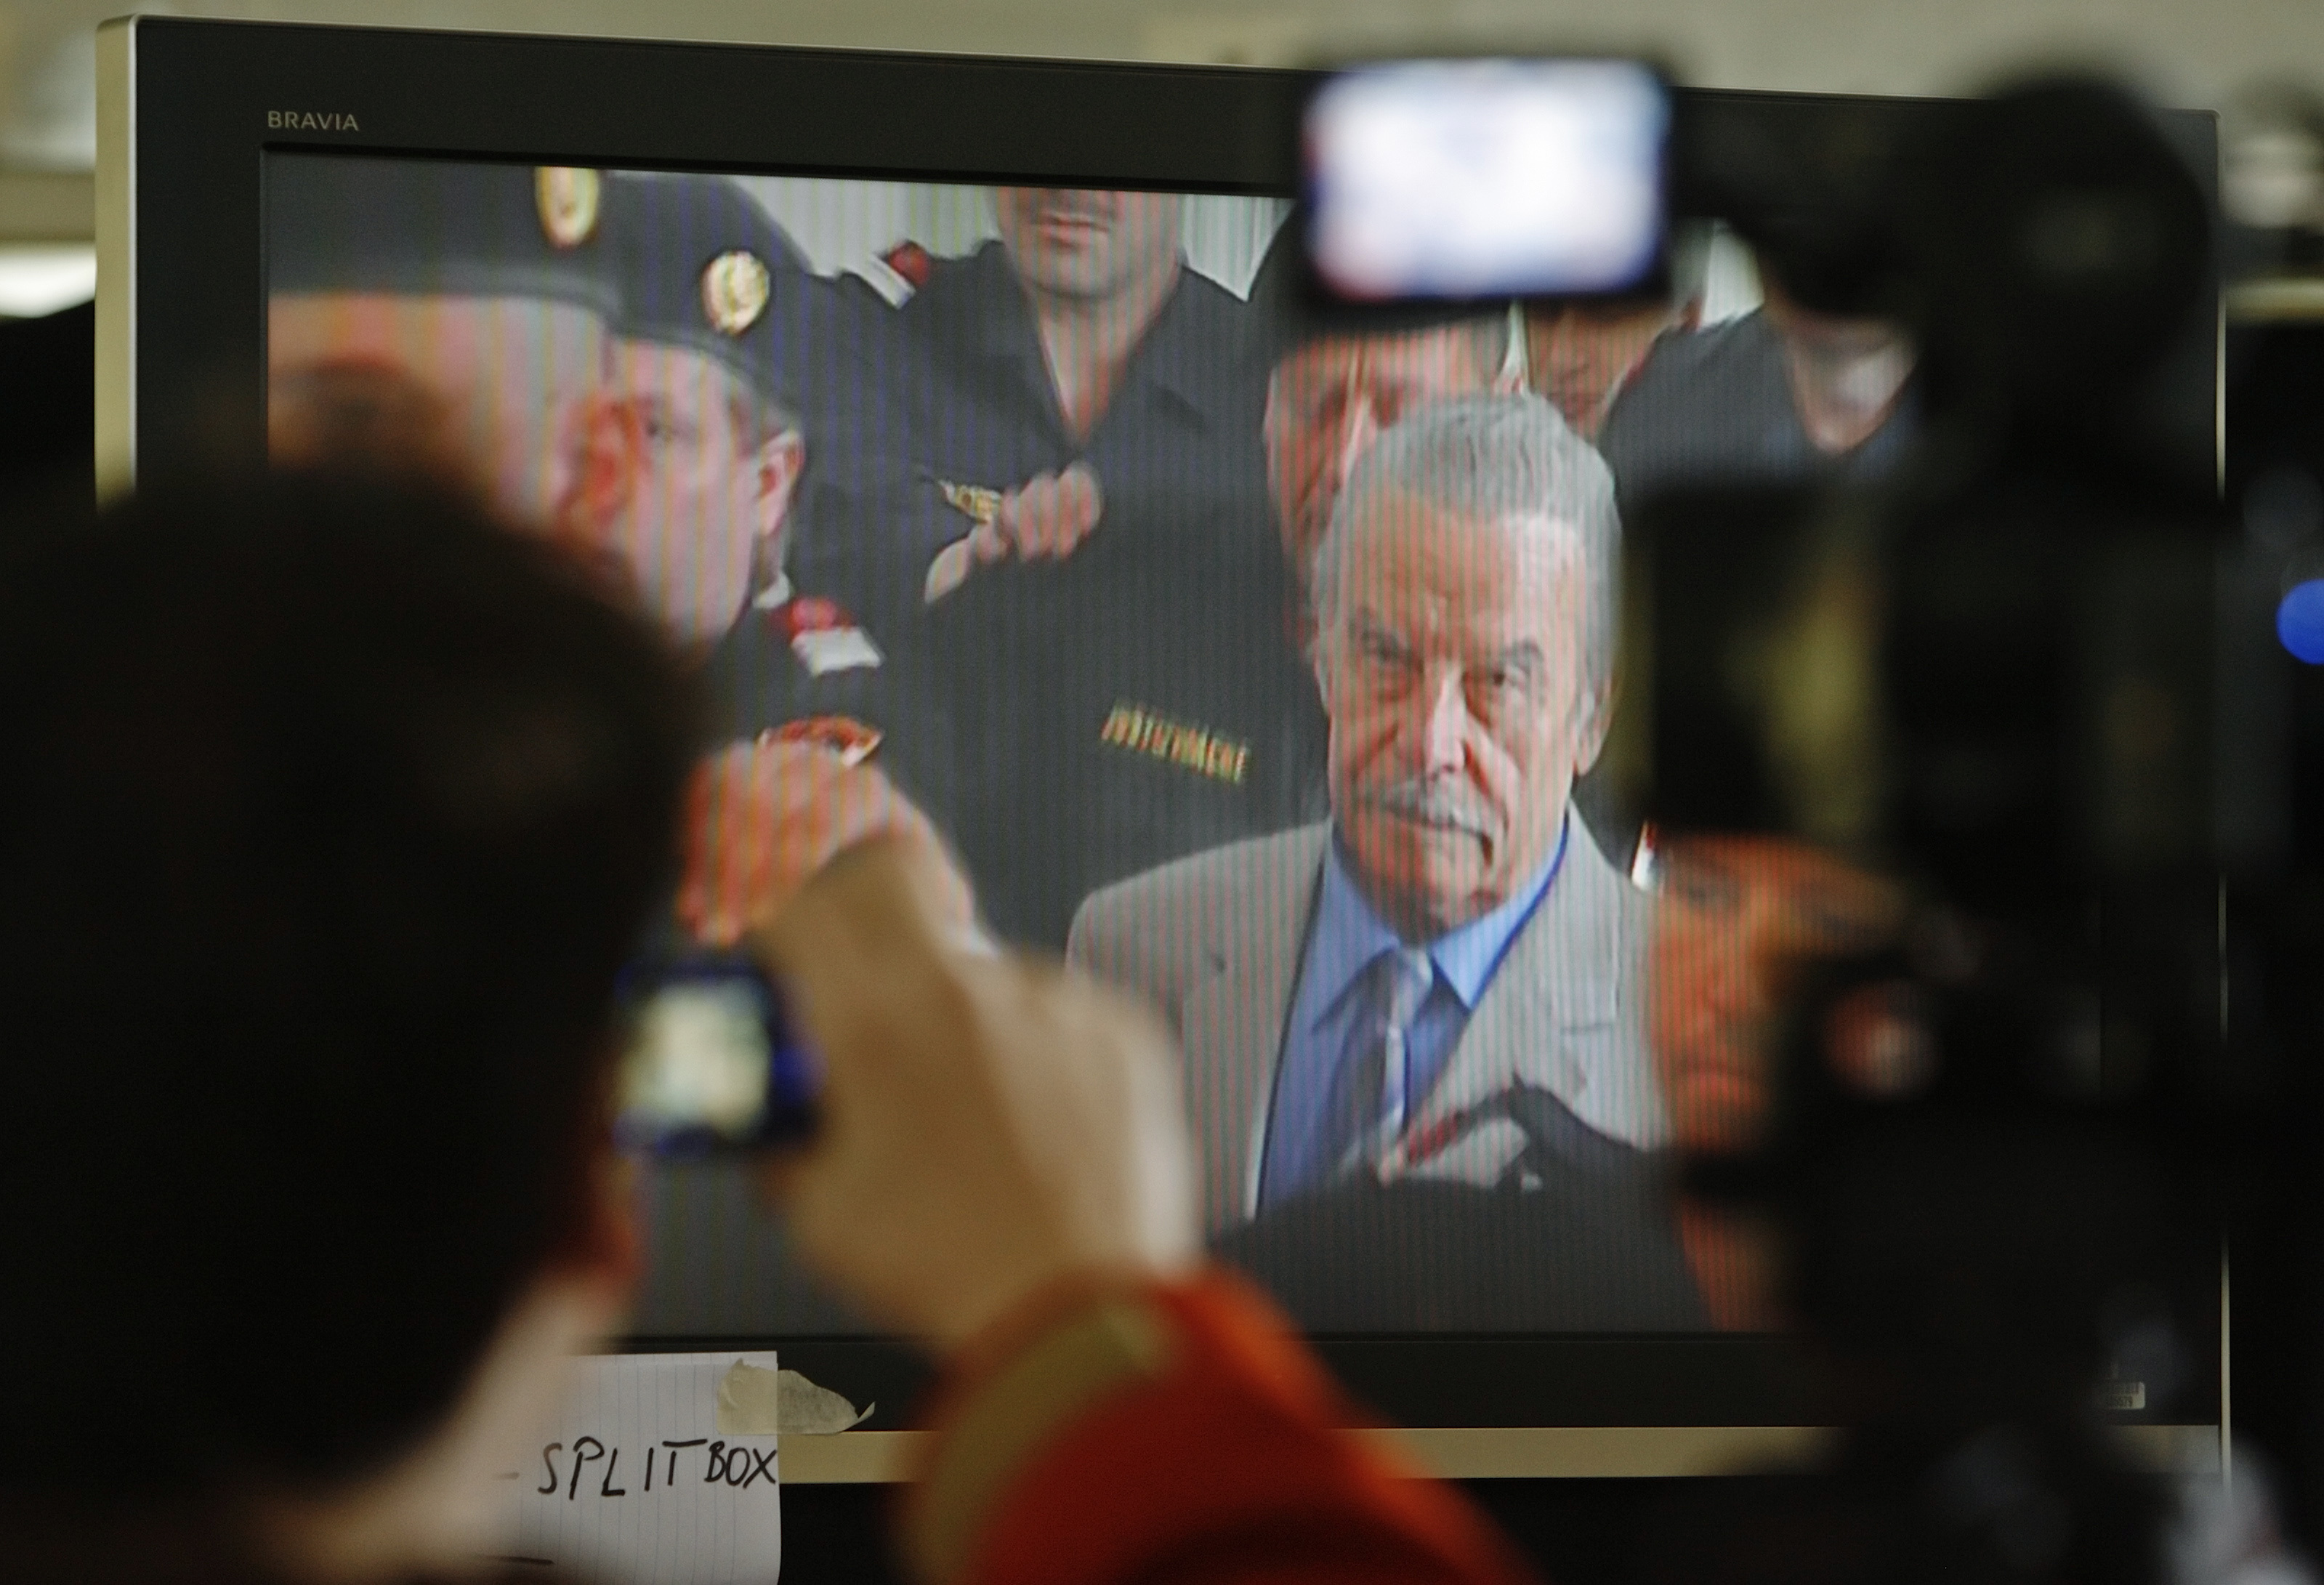 Journalists watch TV screen inside media tent as 73-year-old Austrian Fritzl appears in court on fourth day of his trial in St. Poelten